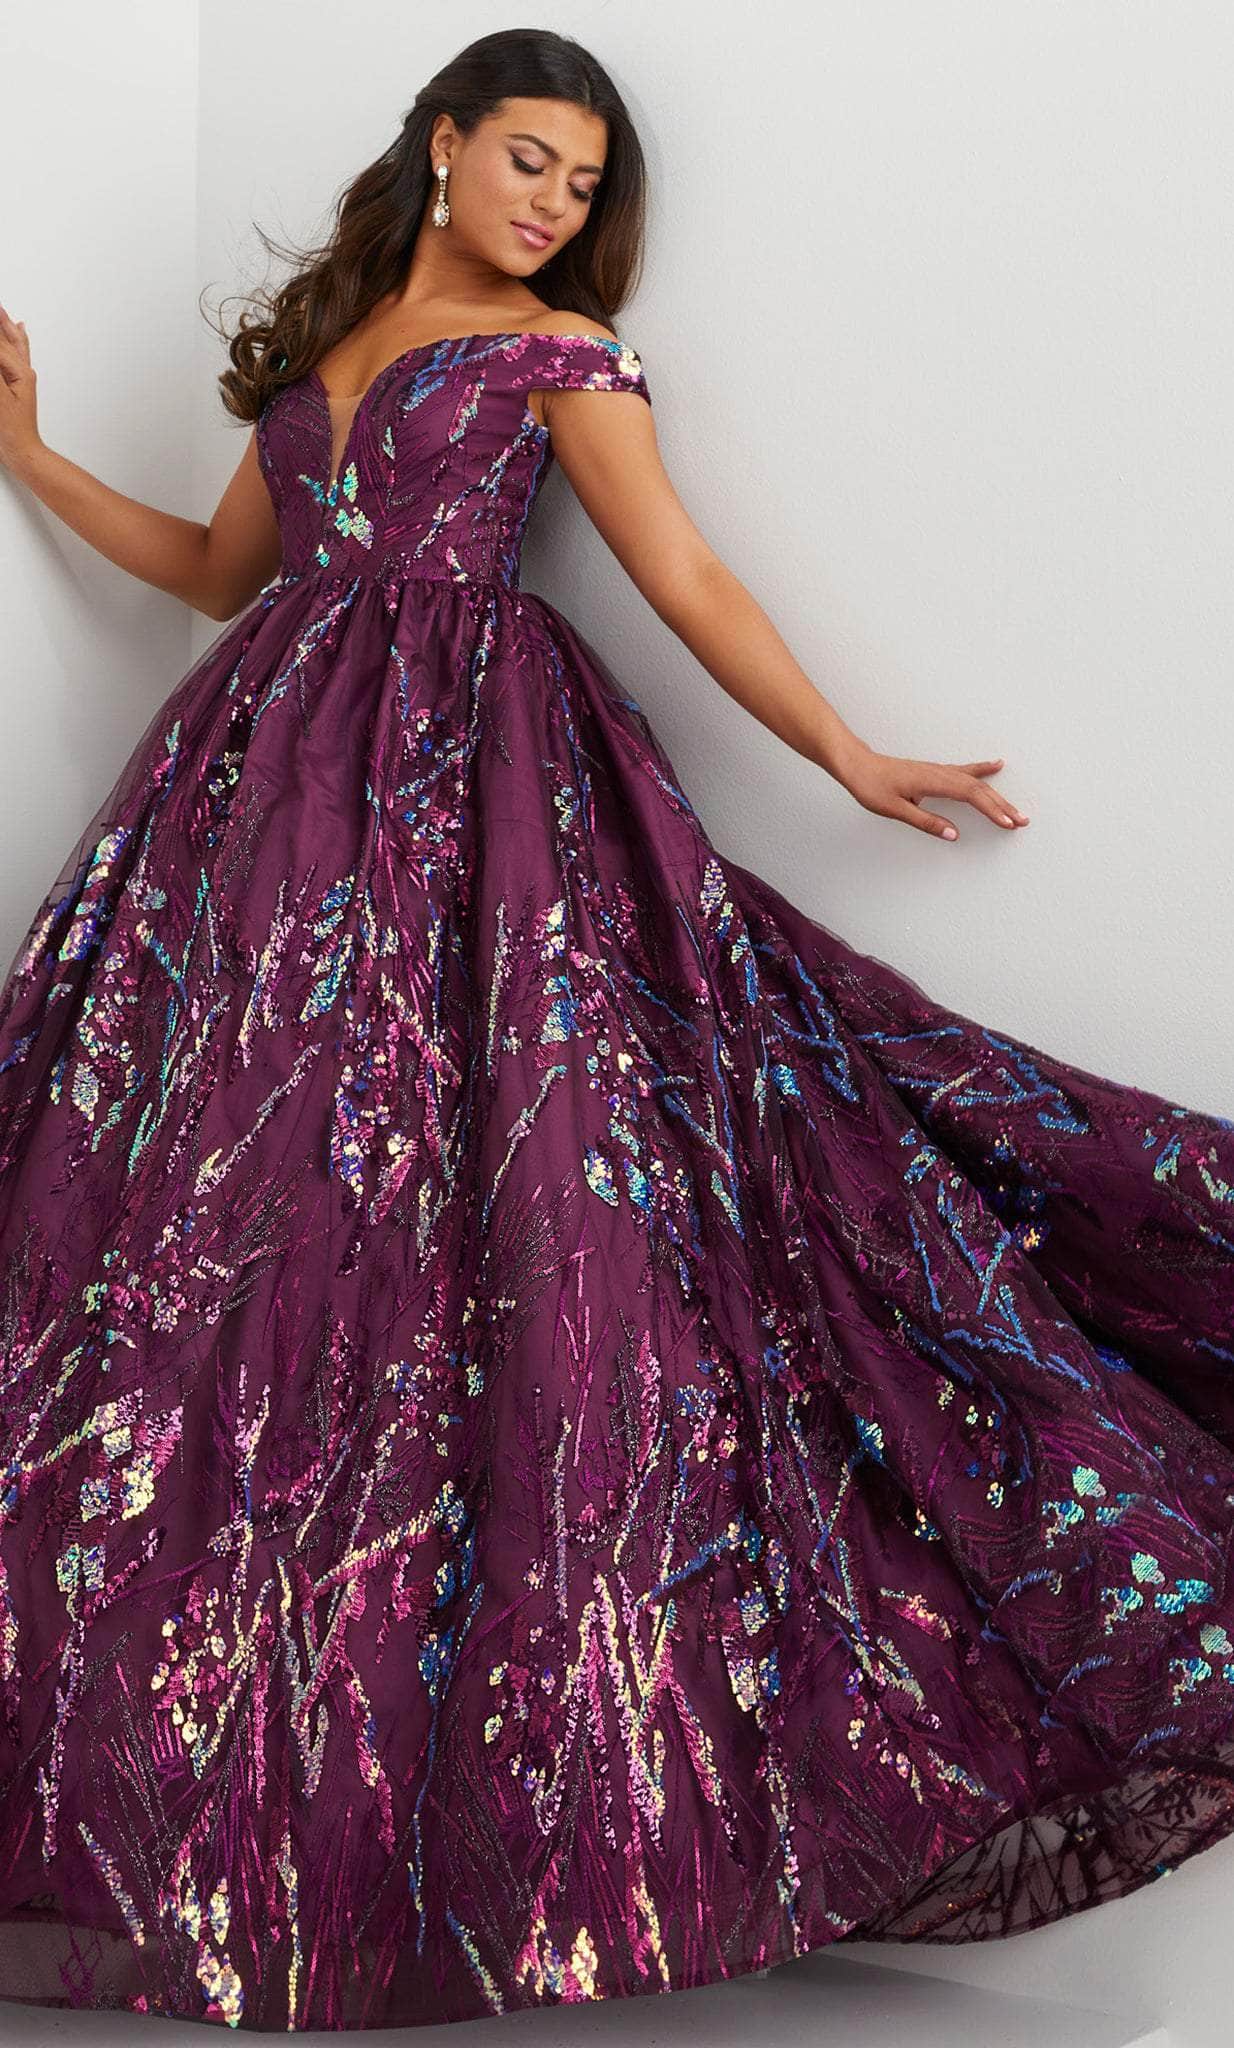 Image of Panoply 14128 - Sequin Ornate Evening Ballgown